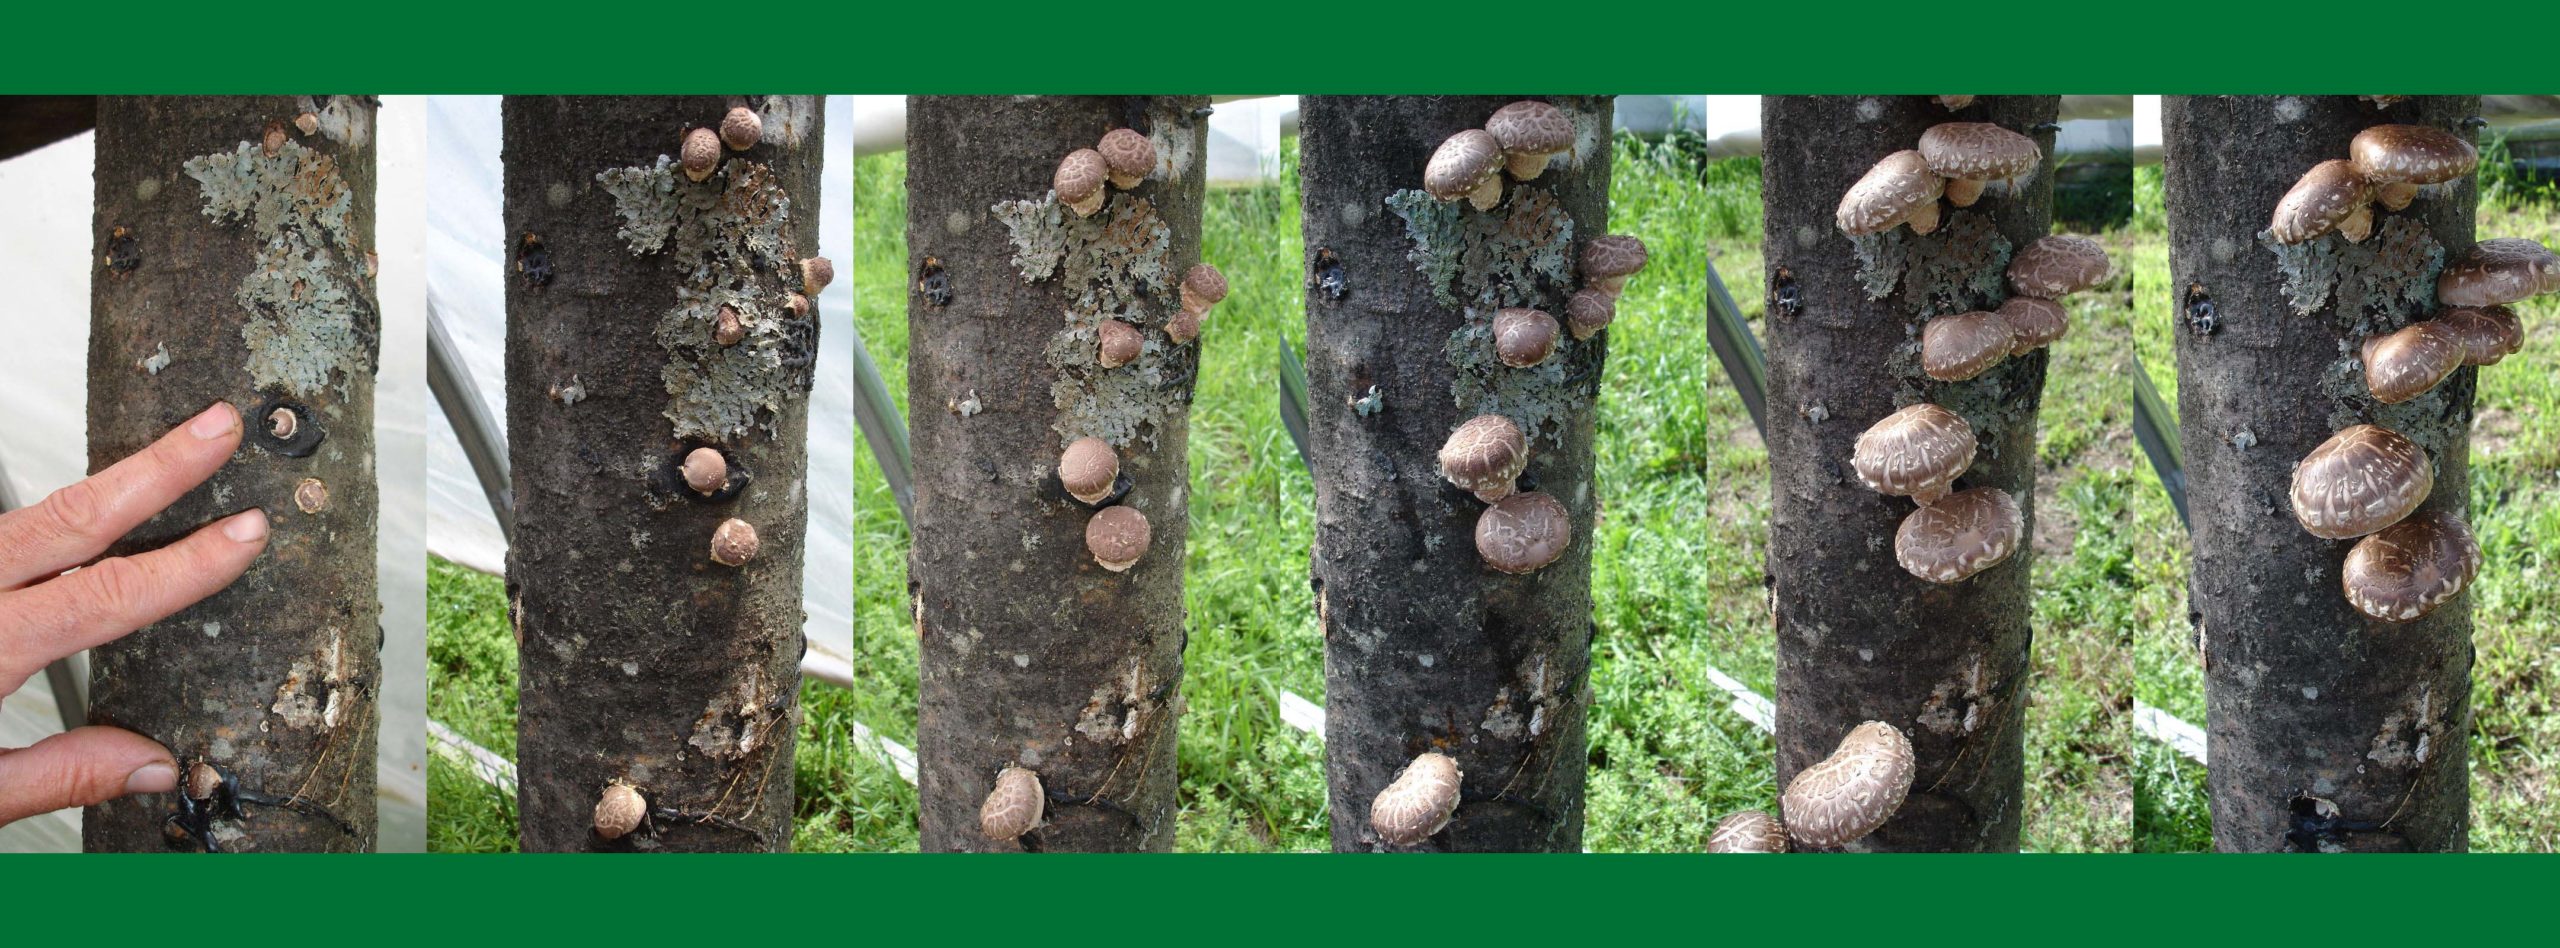 A series of six photos taken 1 day apart from each other shows the rapid growth of shiitake fruiting bodies. In the first picture, the fruiting bodies are about the size of pencil eraserheads. In the last picture, the fungi are approximately the diameter of a golf ball.